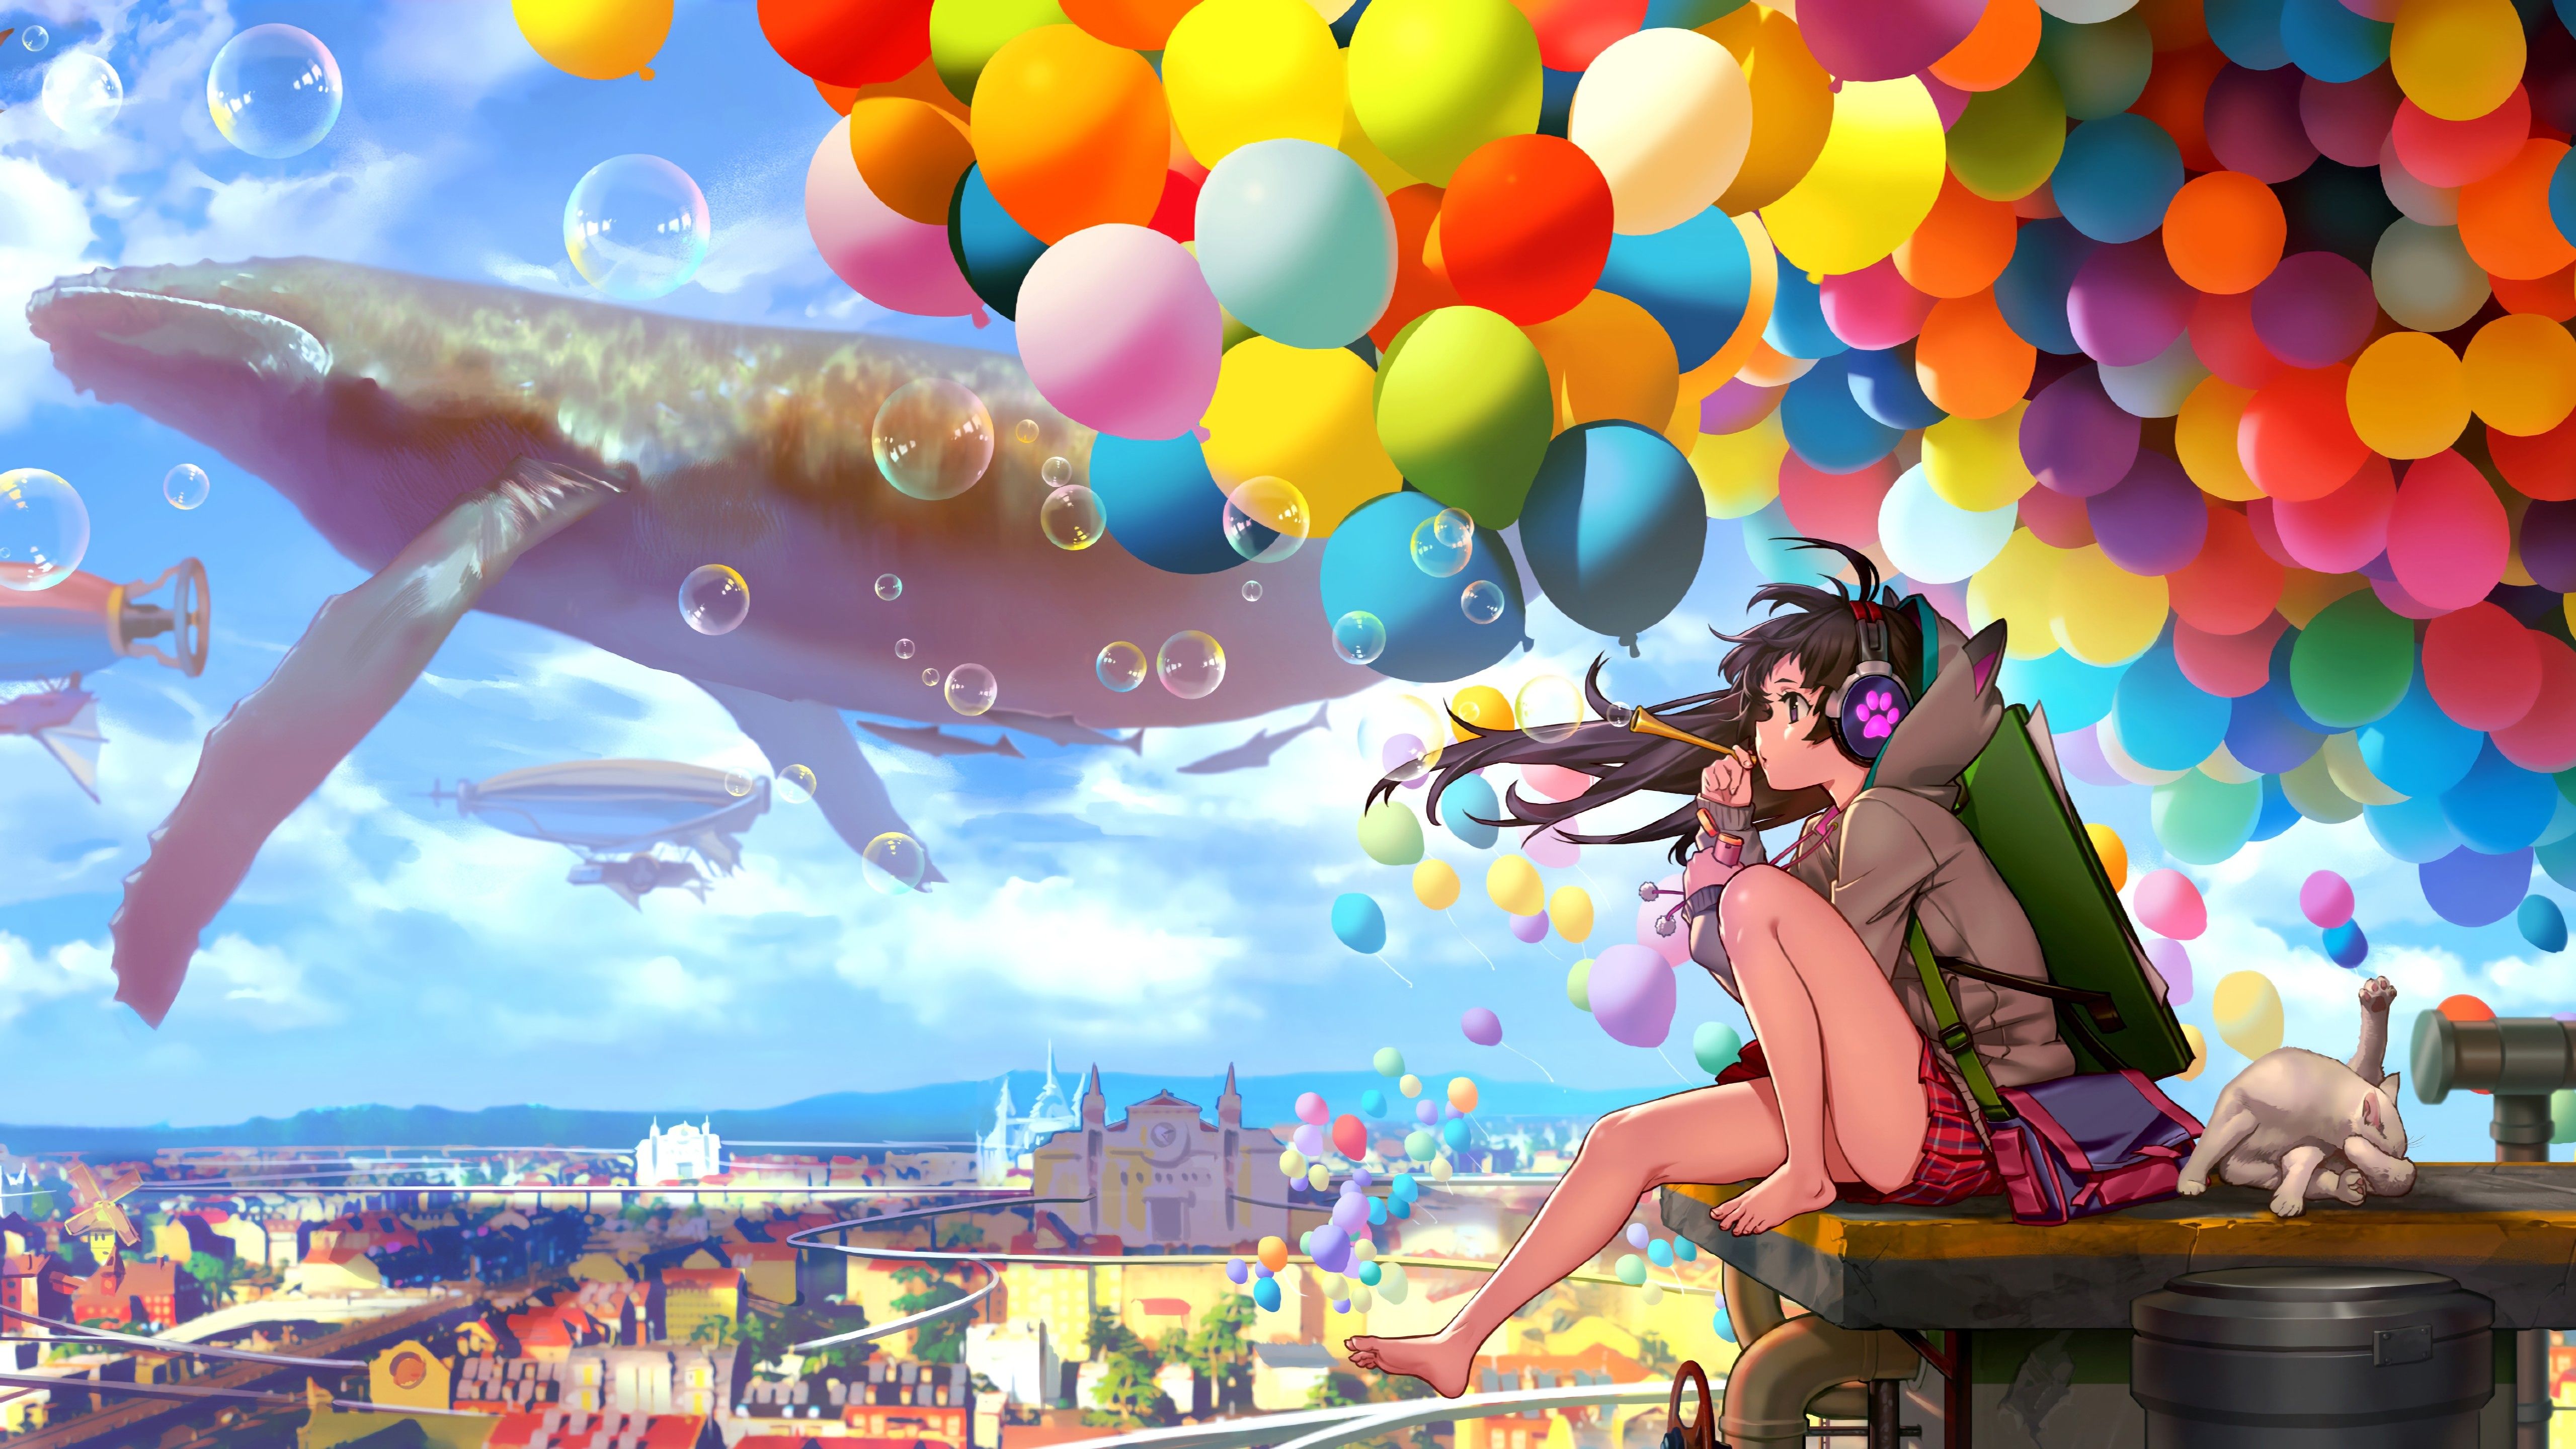 Anime 5120x2880 anime anime girls balloon bubbles sky clouds whale animals cats feet cityscape headphones hot air balloons long hair hair blowing in the wind